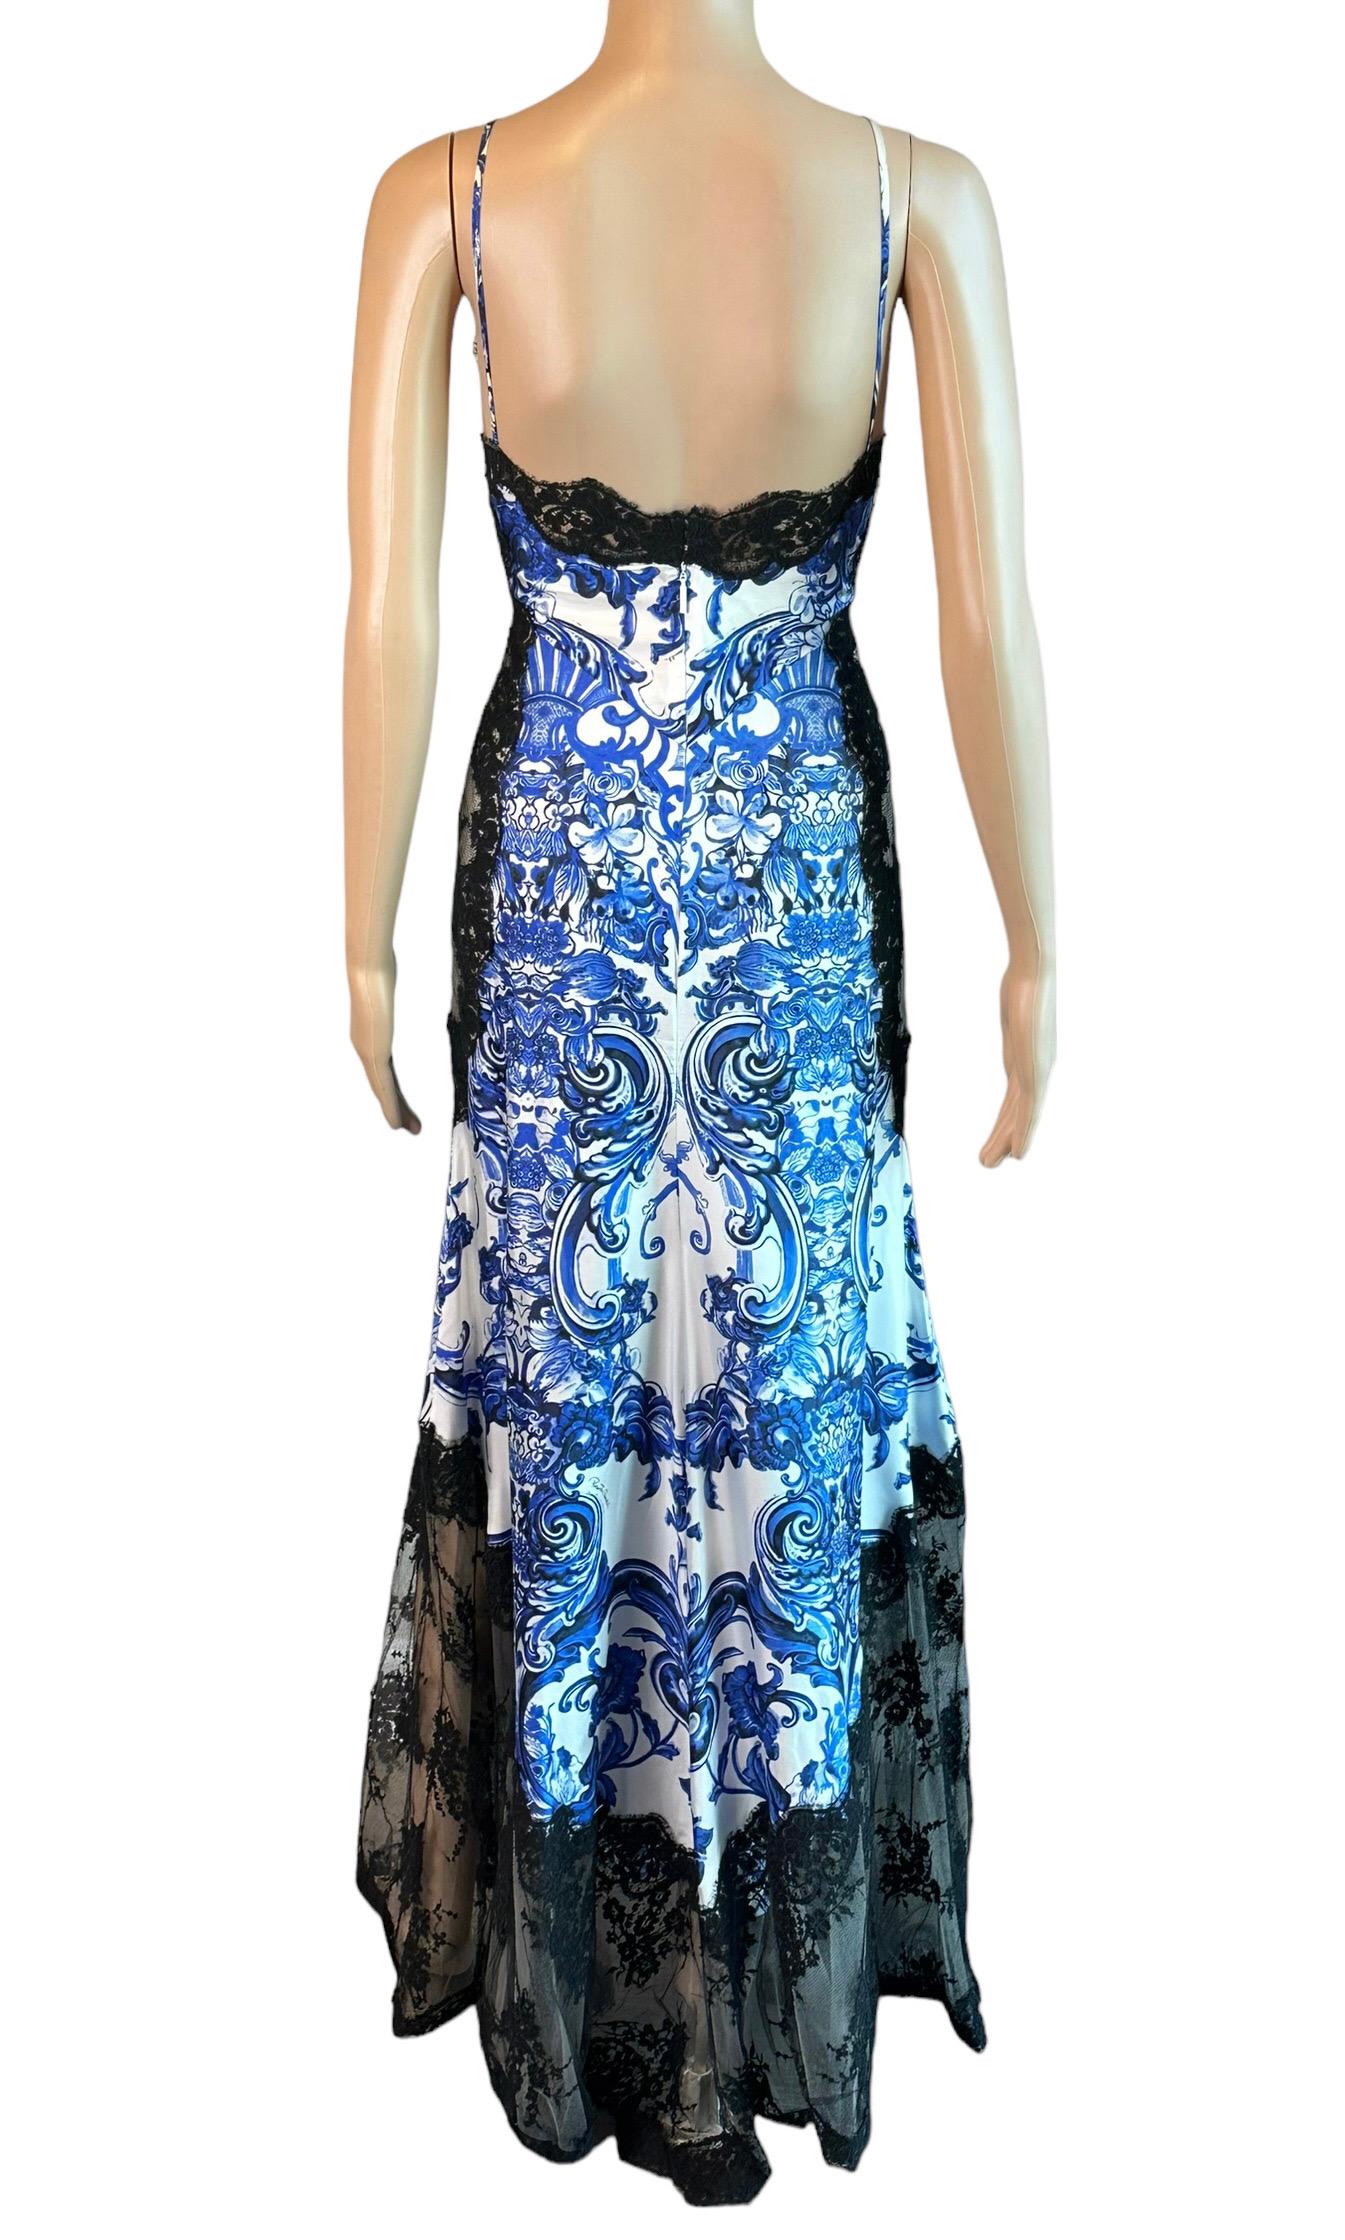 Roberto Cavalli Resort 2013 Chinoiserie Ming Porcelain Sheer Lace Evening Dress For Sale 2